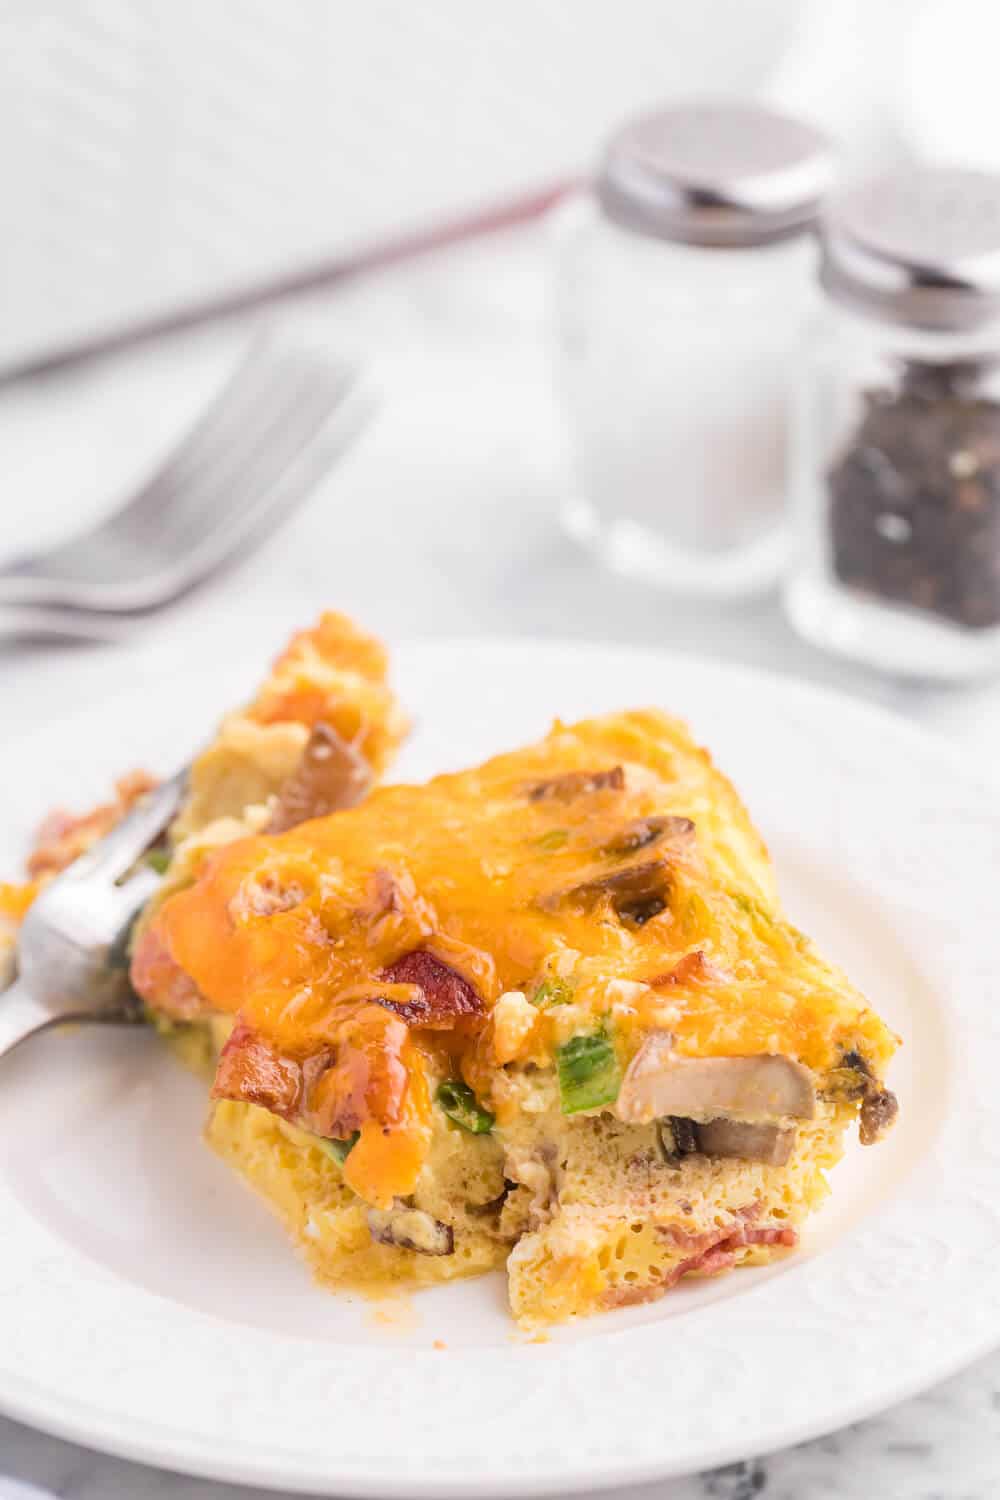 Crustless Bacon and Cheese Quiche - Rich, creamy eggs with bacon and cheese are a fantastic, lower carb option for brunch or dinner. Served with fruit or mixed greens, this is delicious and satisfying, no matter what time of day you make it!